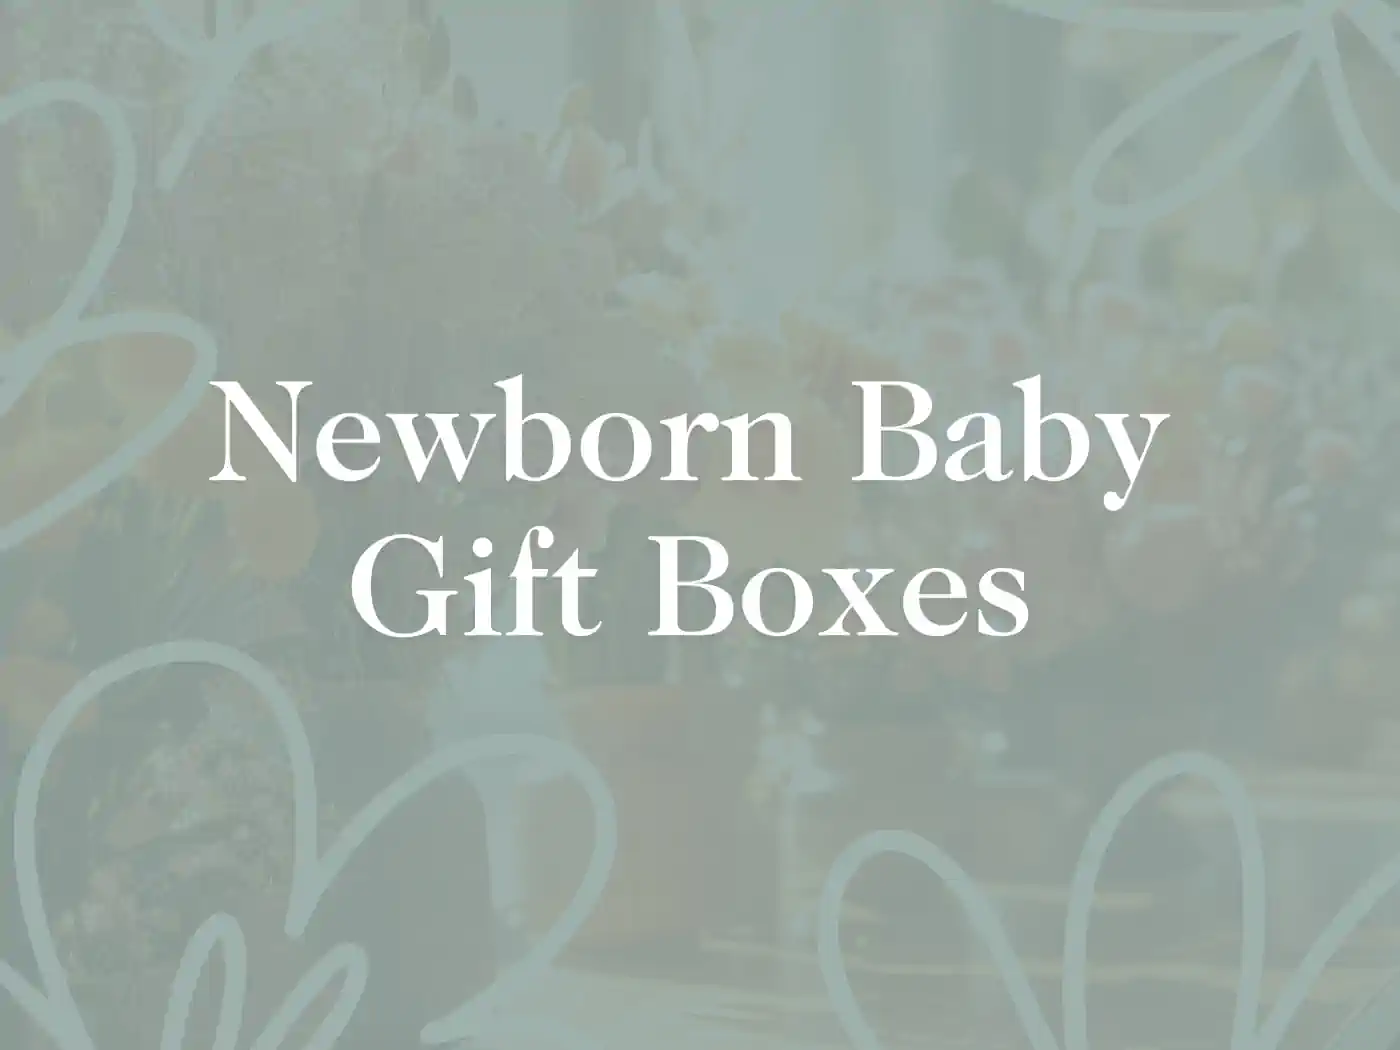 Text reading "Newborn Baby Gift Boxes" over a floral background, Fabulous Flowers and Gifts, Newborn Baby Gift Boxes